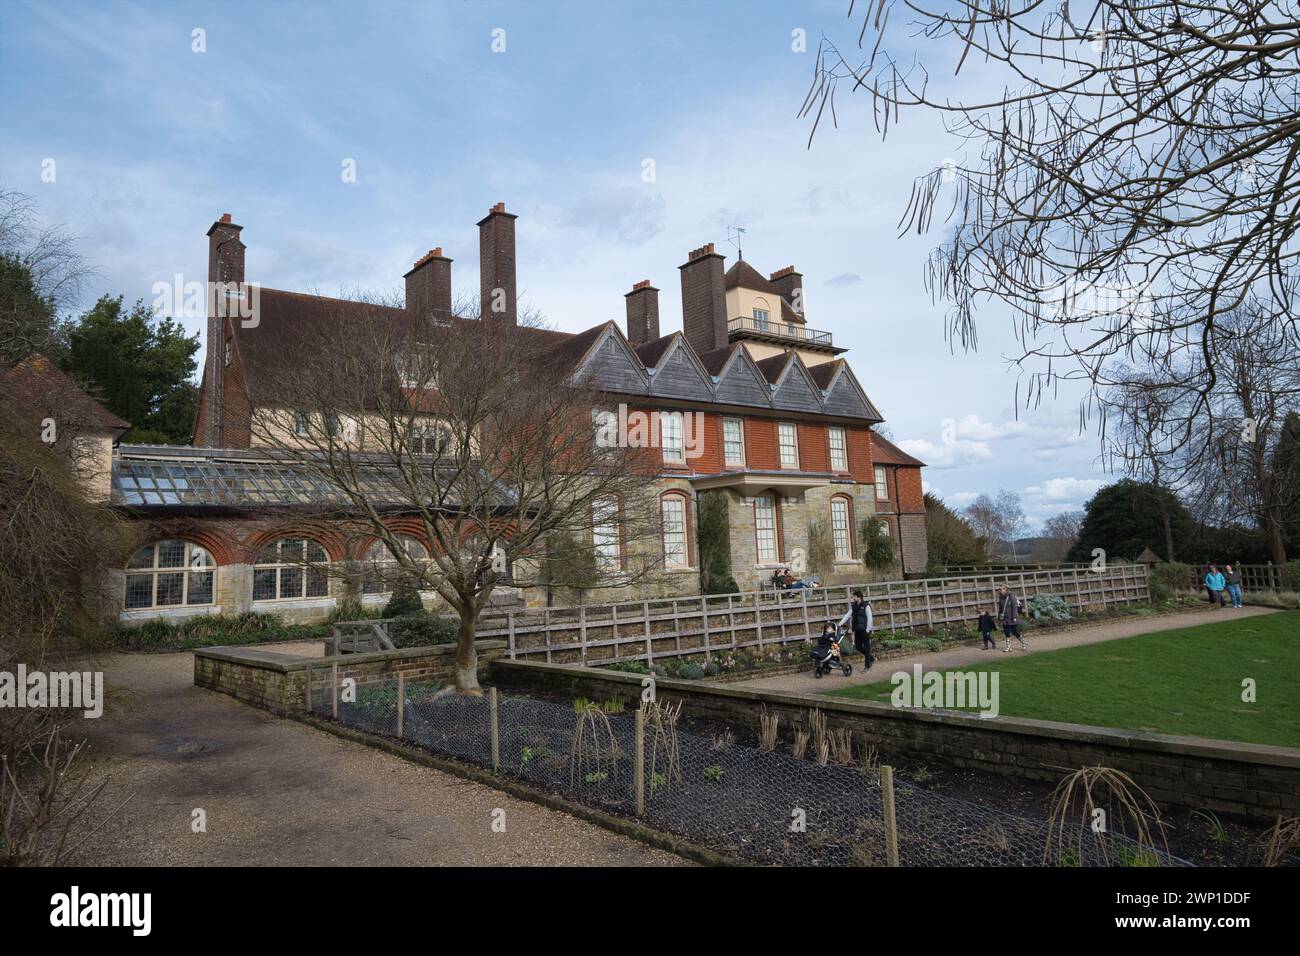 Standen House vicino a East Grinstead nel West Sussex in inverno Foto Stock